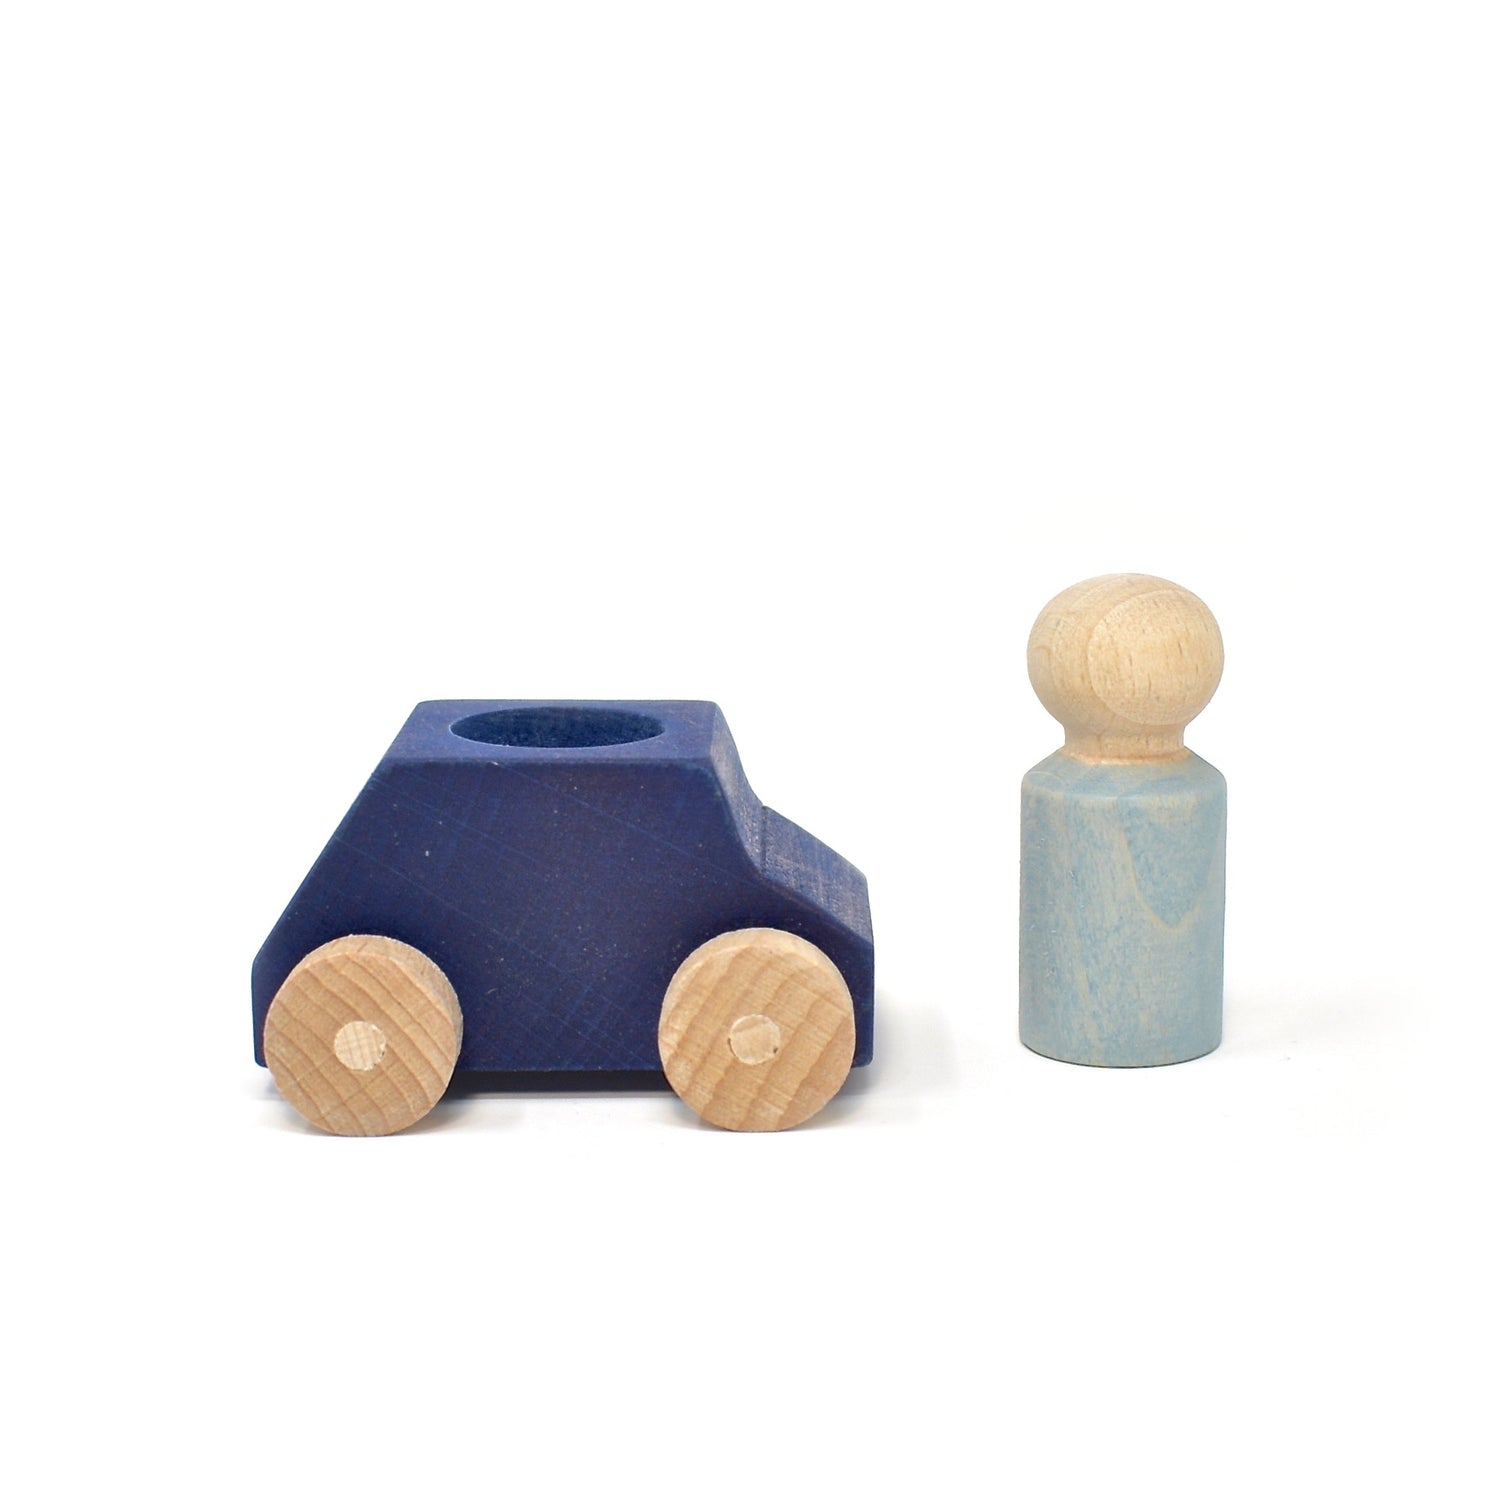 LUBULONA CAR Blue with Grey Figure by LUBULONA - The Playful Collective